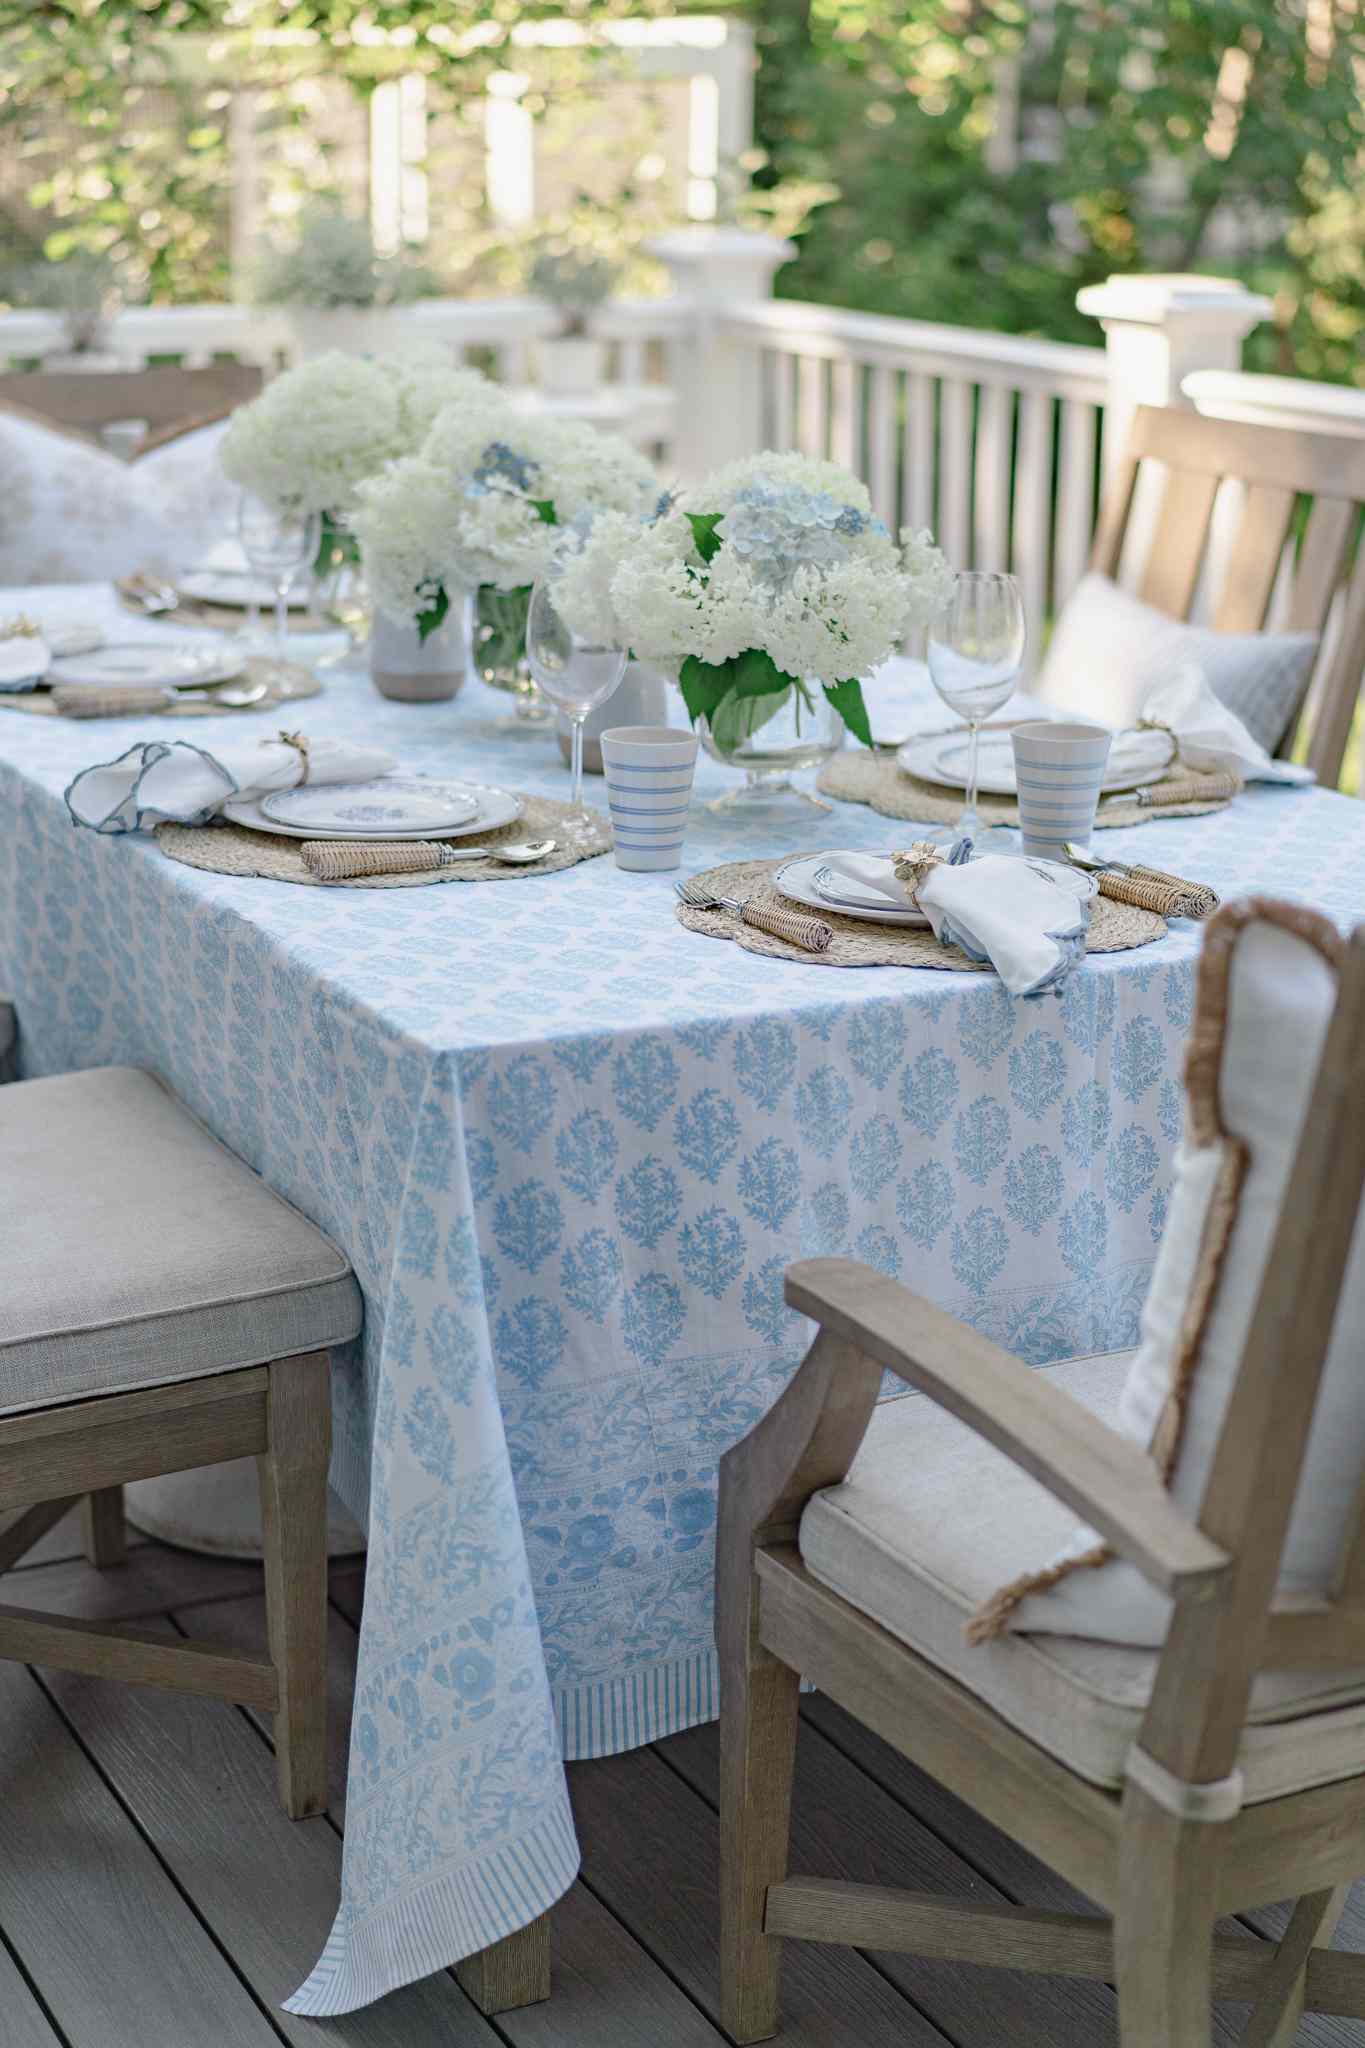 Porch dining table set in a blue and white color scheme